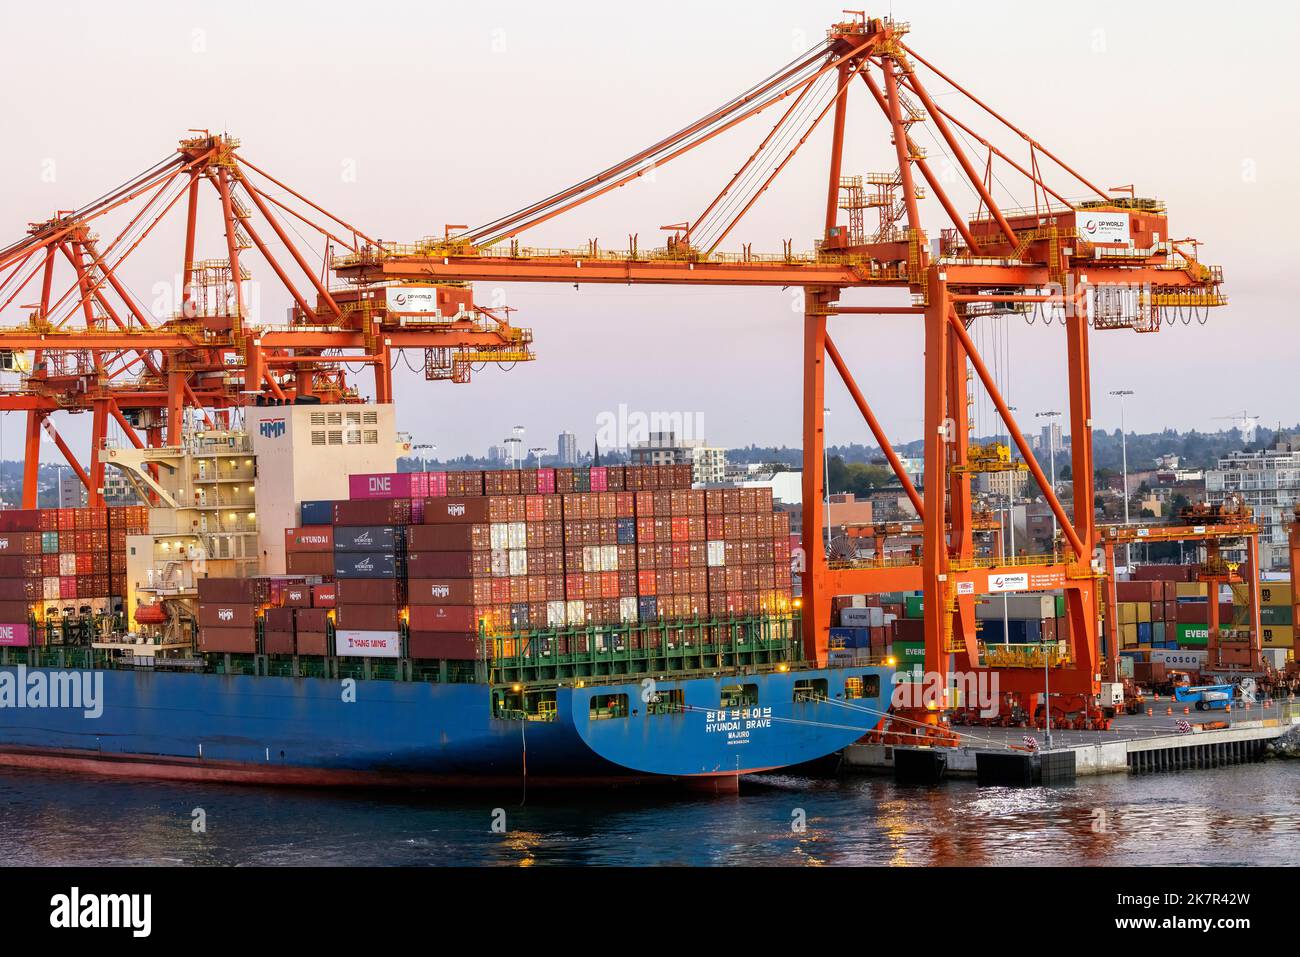 Cranes loading shipping containers in the Port of Vancouver - Vancouver, British Columbia, Canada Stock Photo